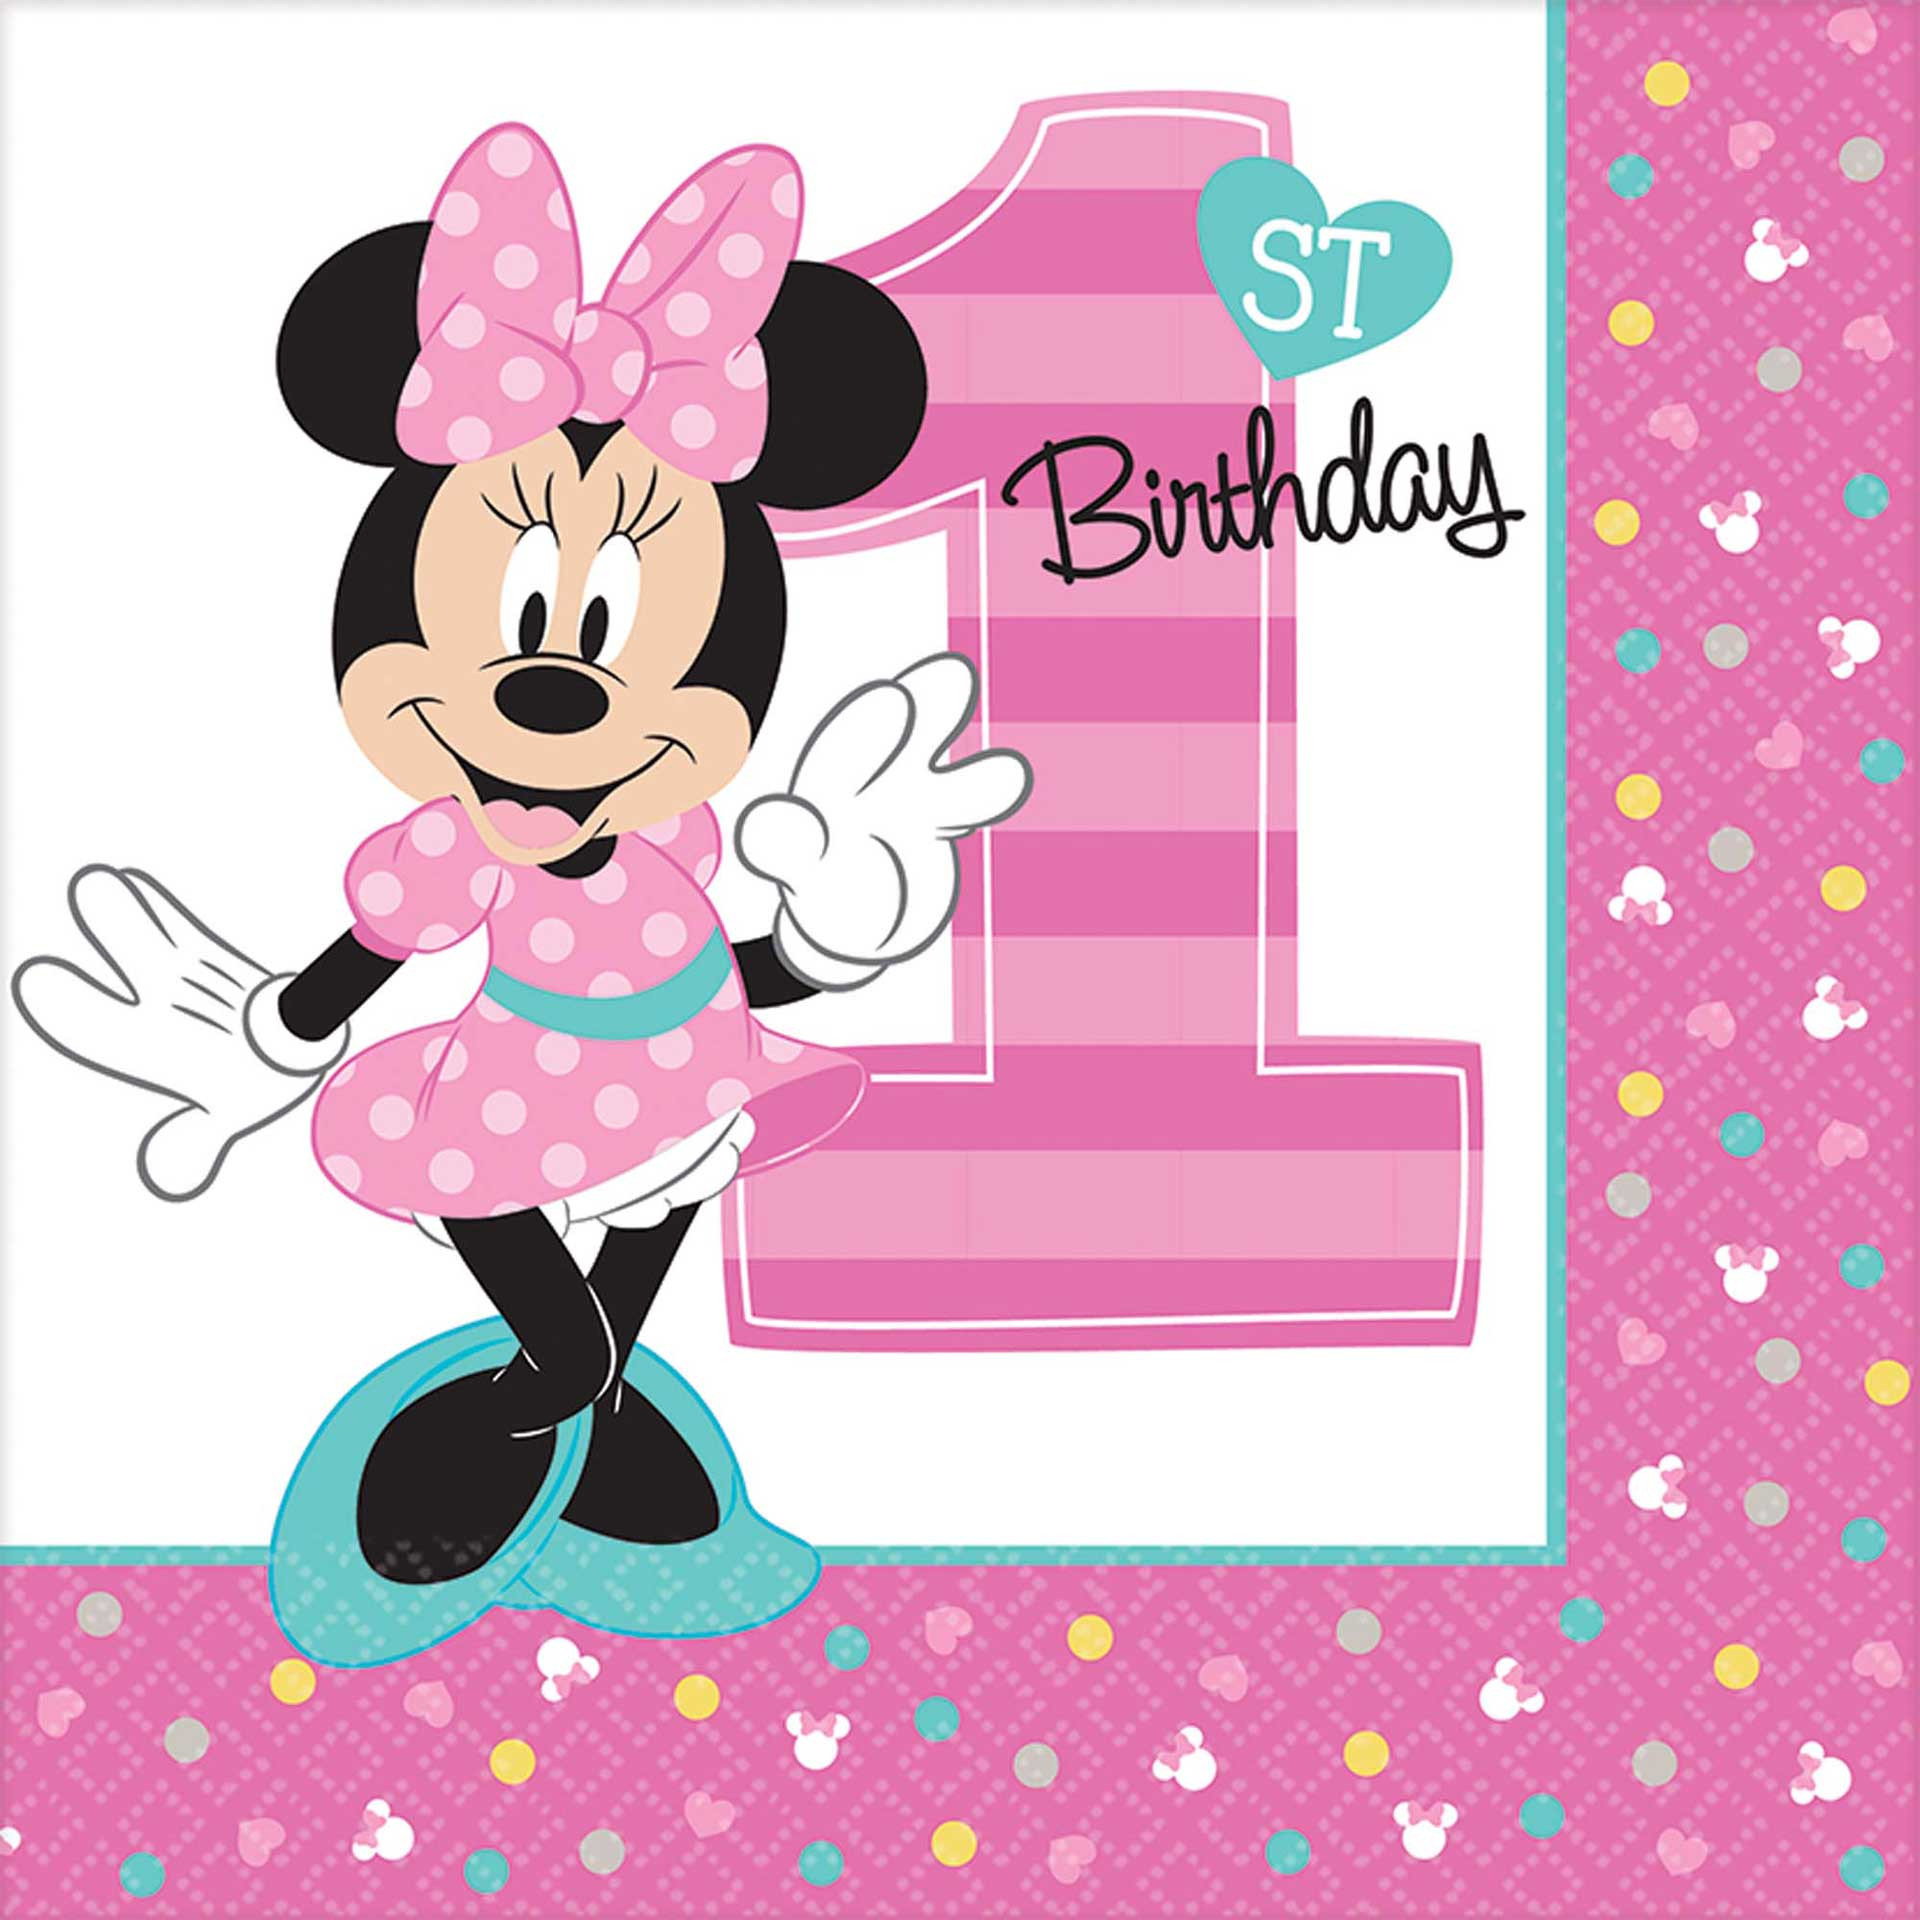 Minnie Mouse 1st Birthday Party Decorations
 Minnie Mouse 1st Birthday Party Supplies Theme Party Packs